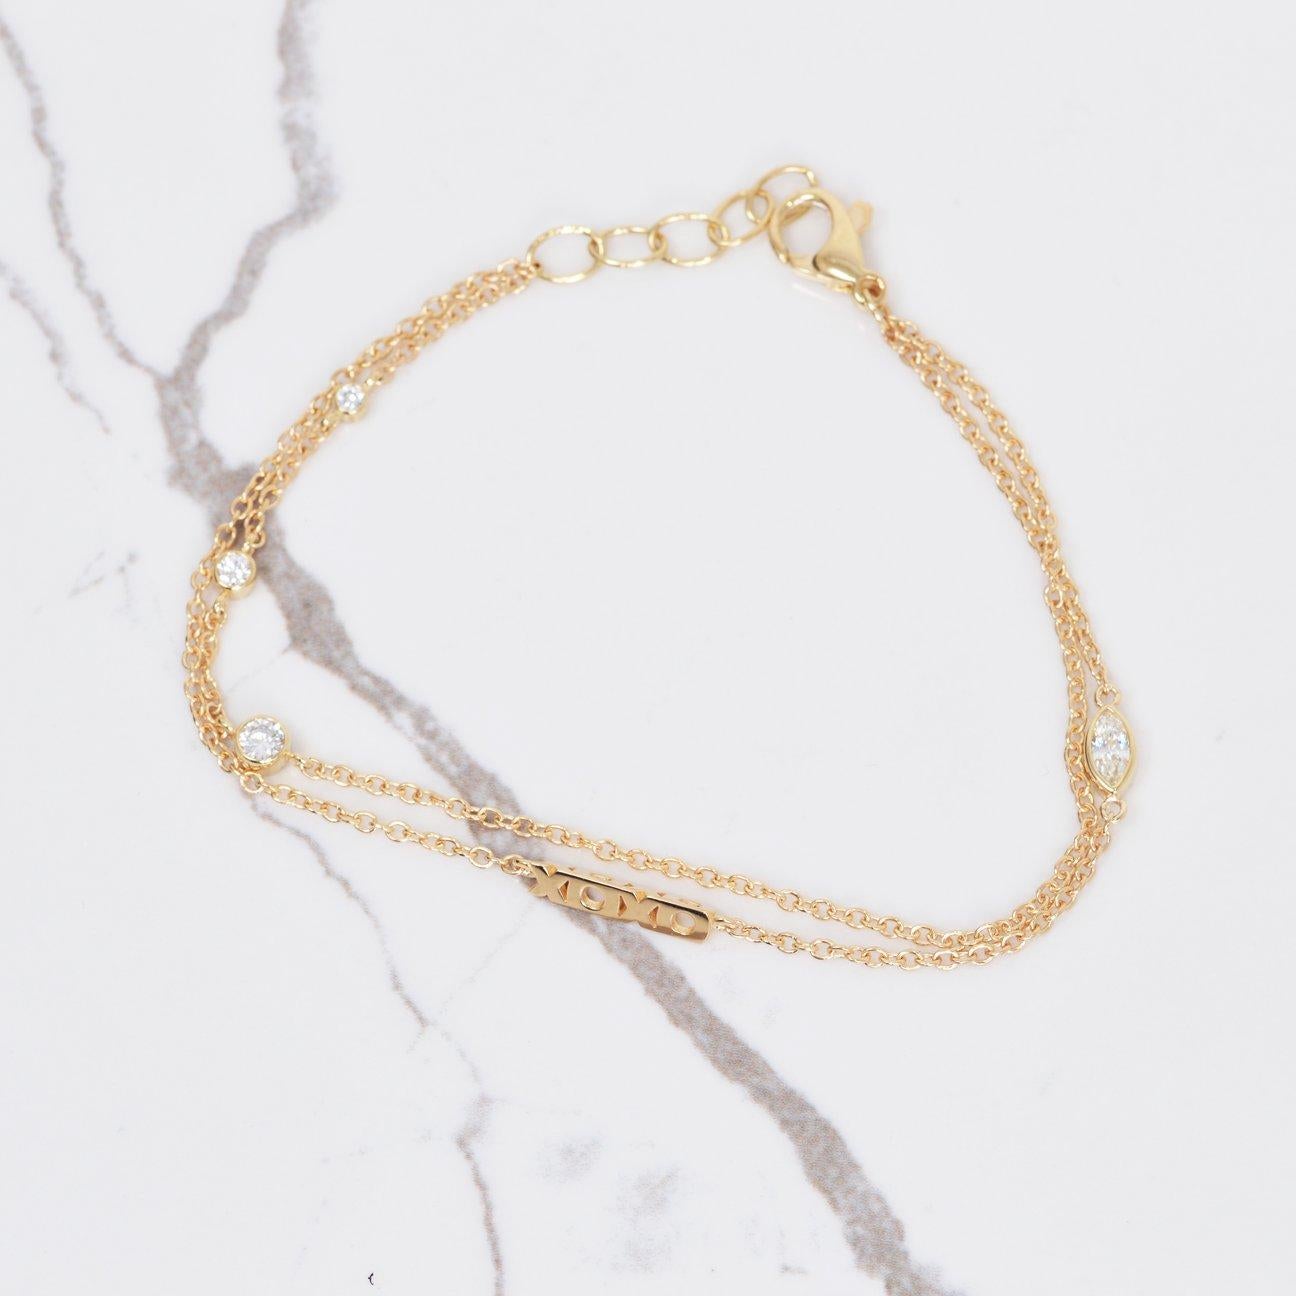 Can't feel nothing but love when wearing this stunning bracelet! This 14k yellow gold double chain bracelet has a XOXO rotating charm with beautiful diamond accents that total .39 carats. This bracelet measures 7-7.5 inches.